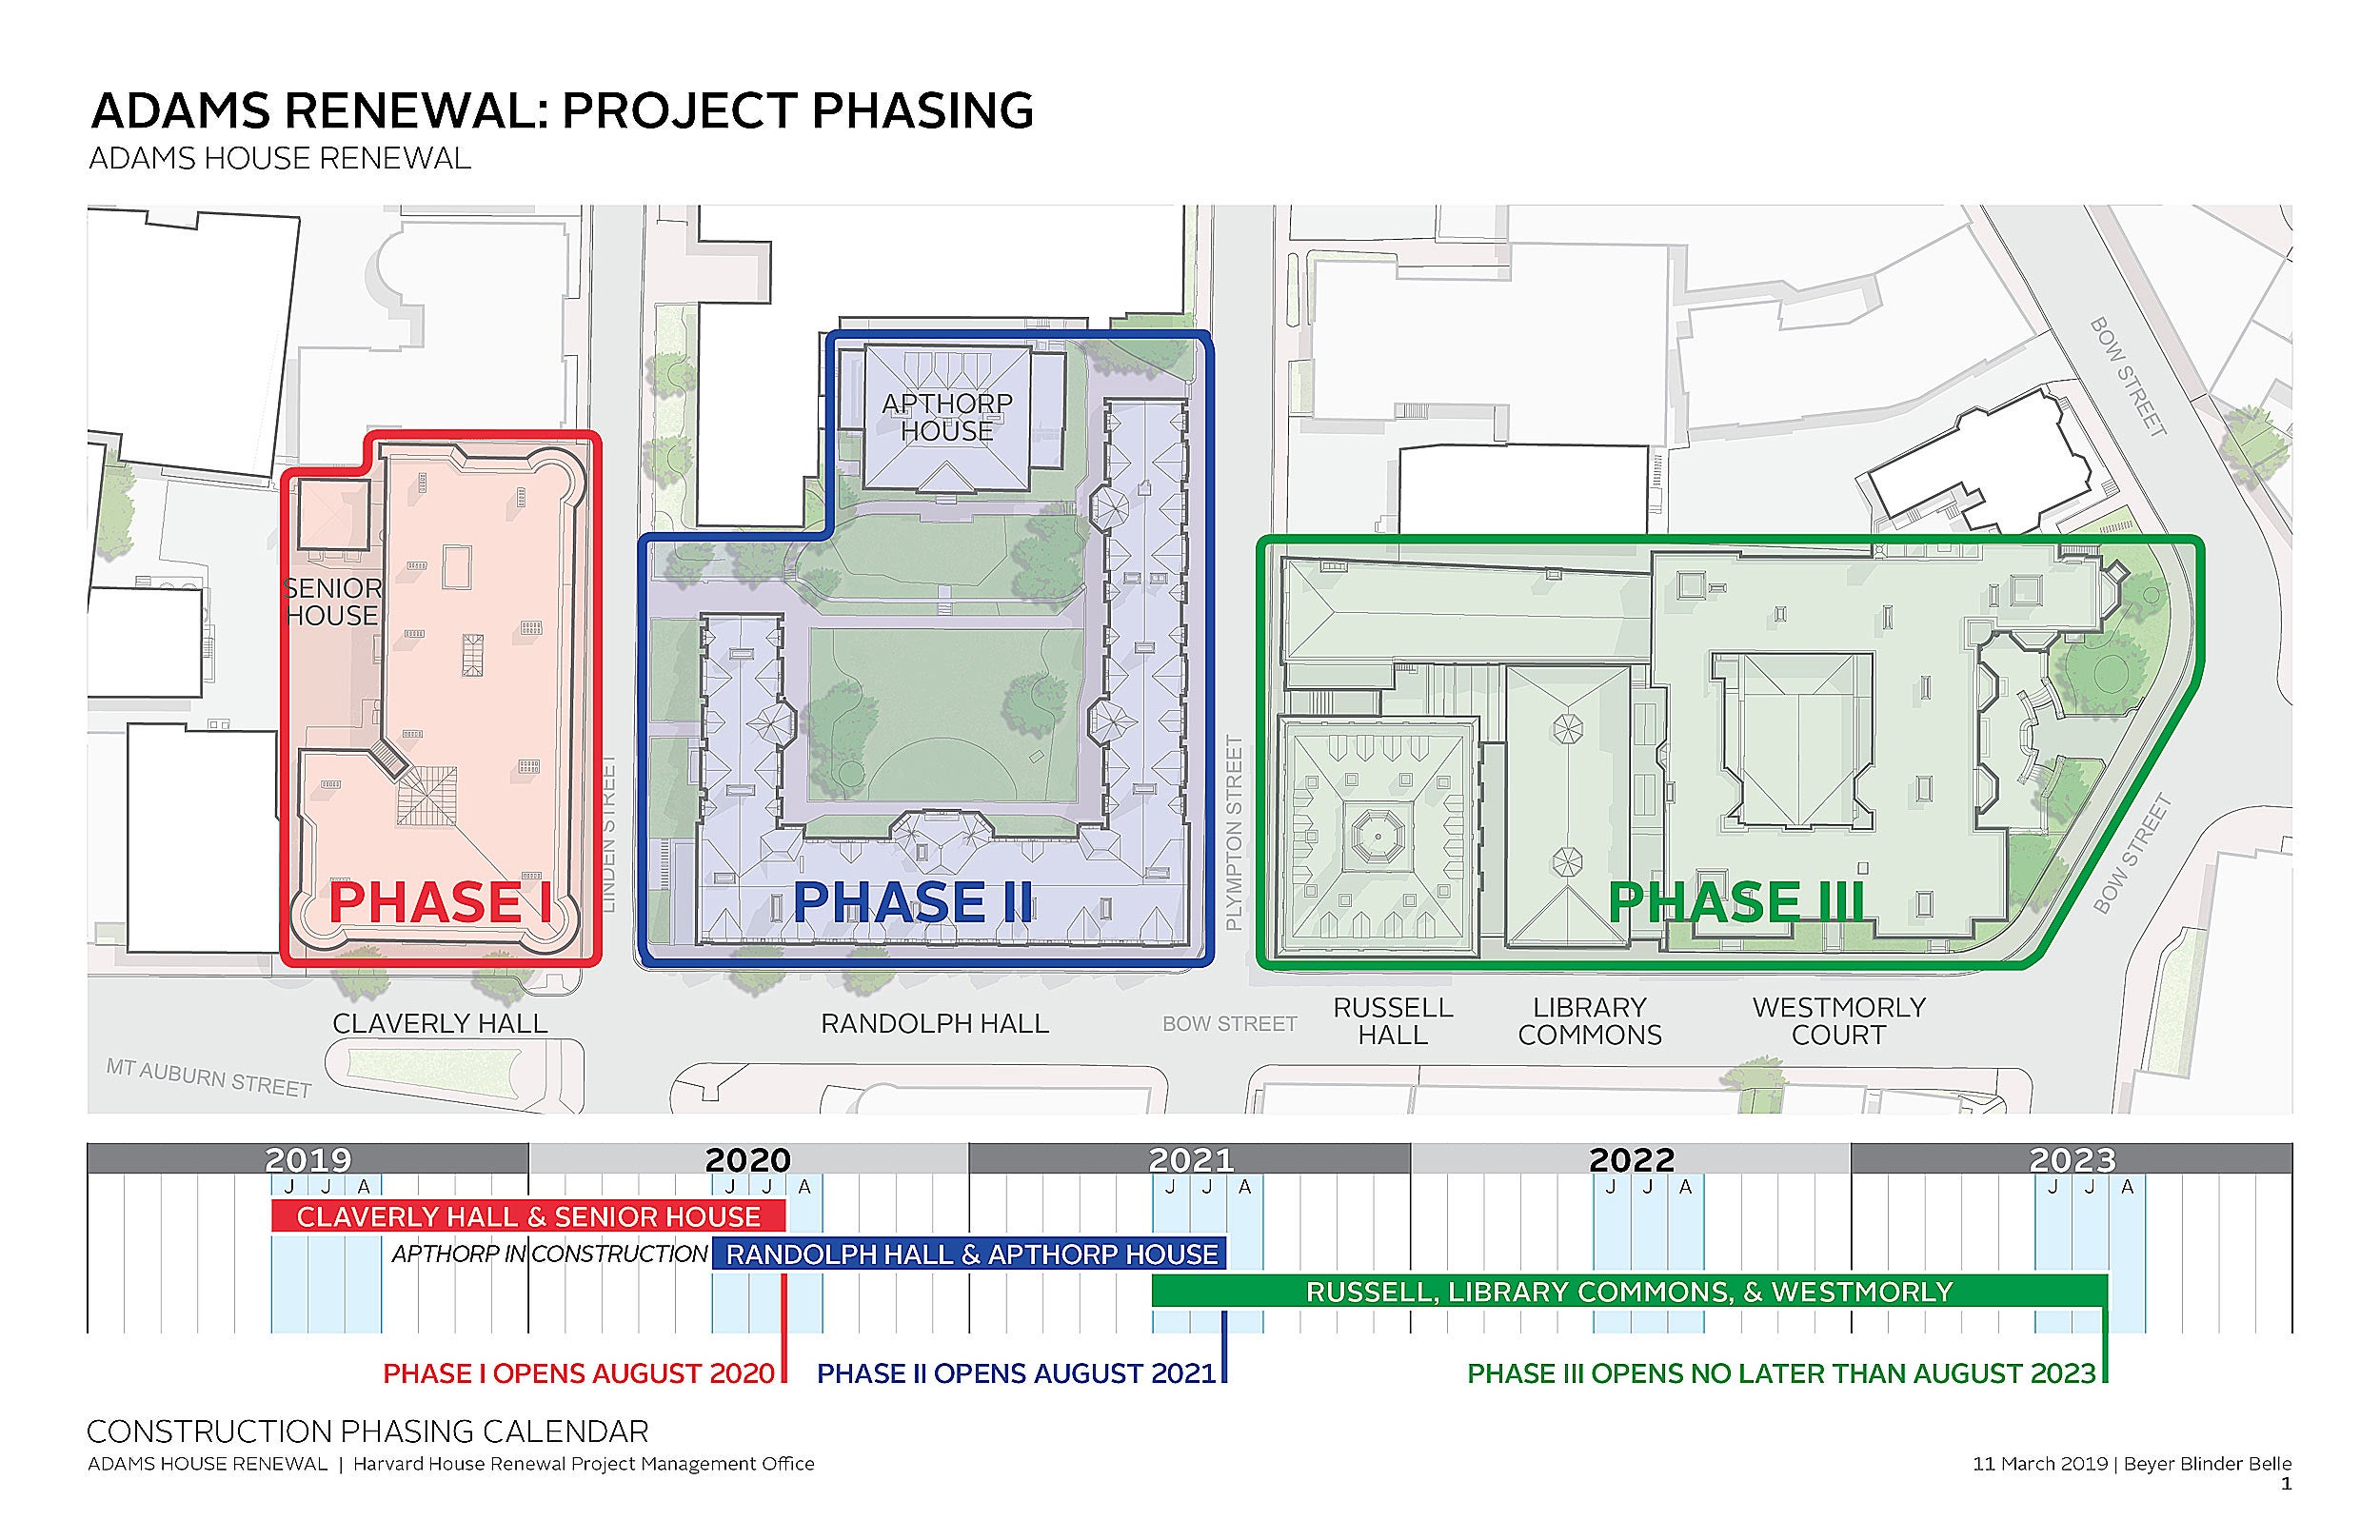 Construction stages of the project during the next five years.